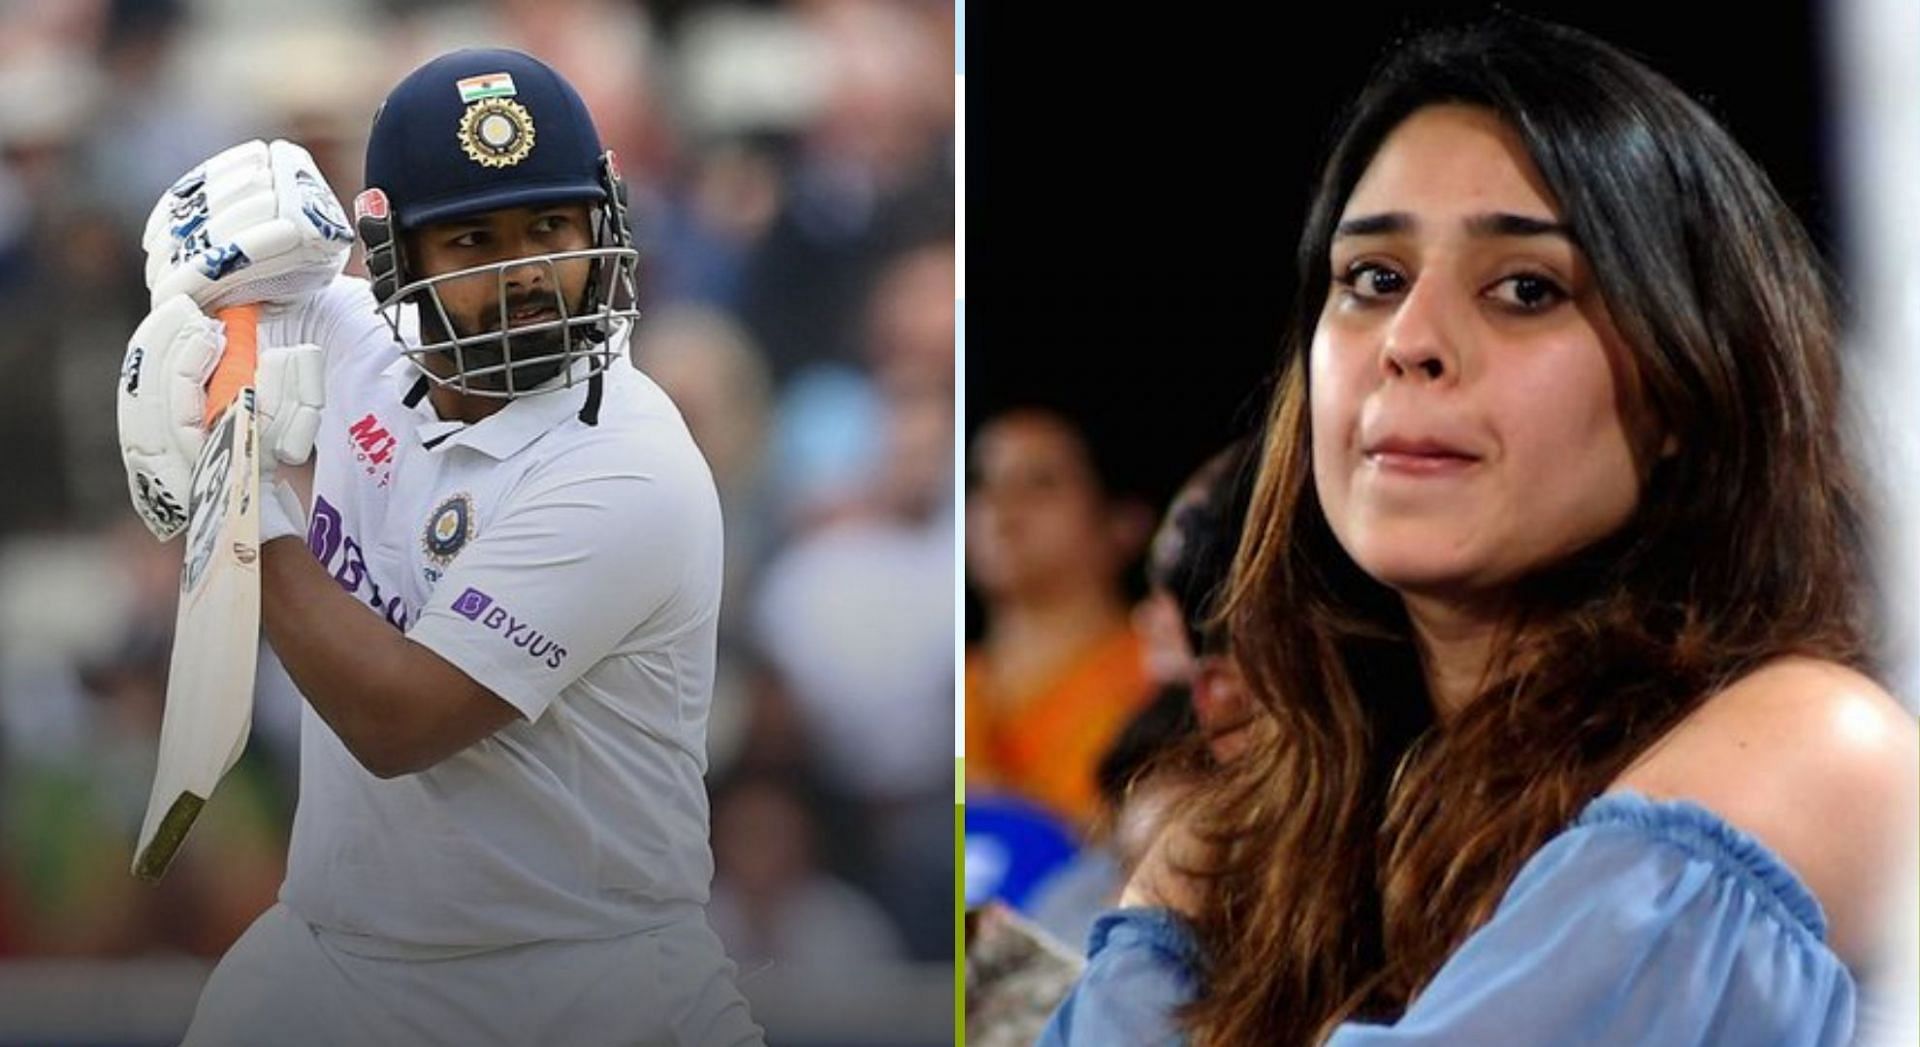 Insensitivity" - Rohit Sharma's wife Ritika Sajdeh lashes out as injured Rishabh Pant's pictures and videos go viral on social media